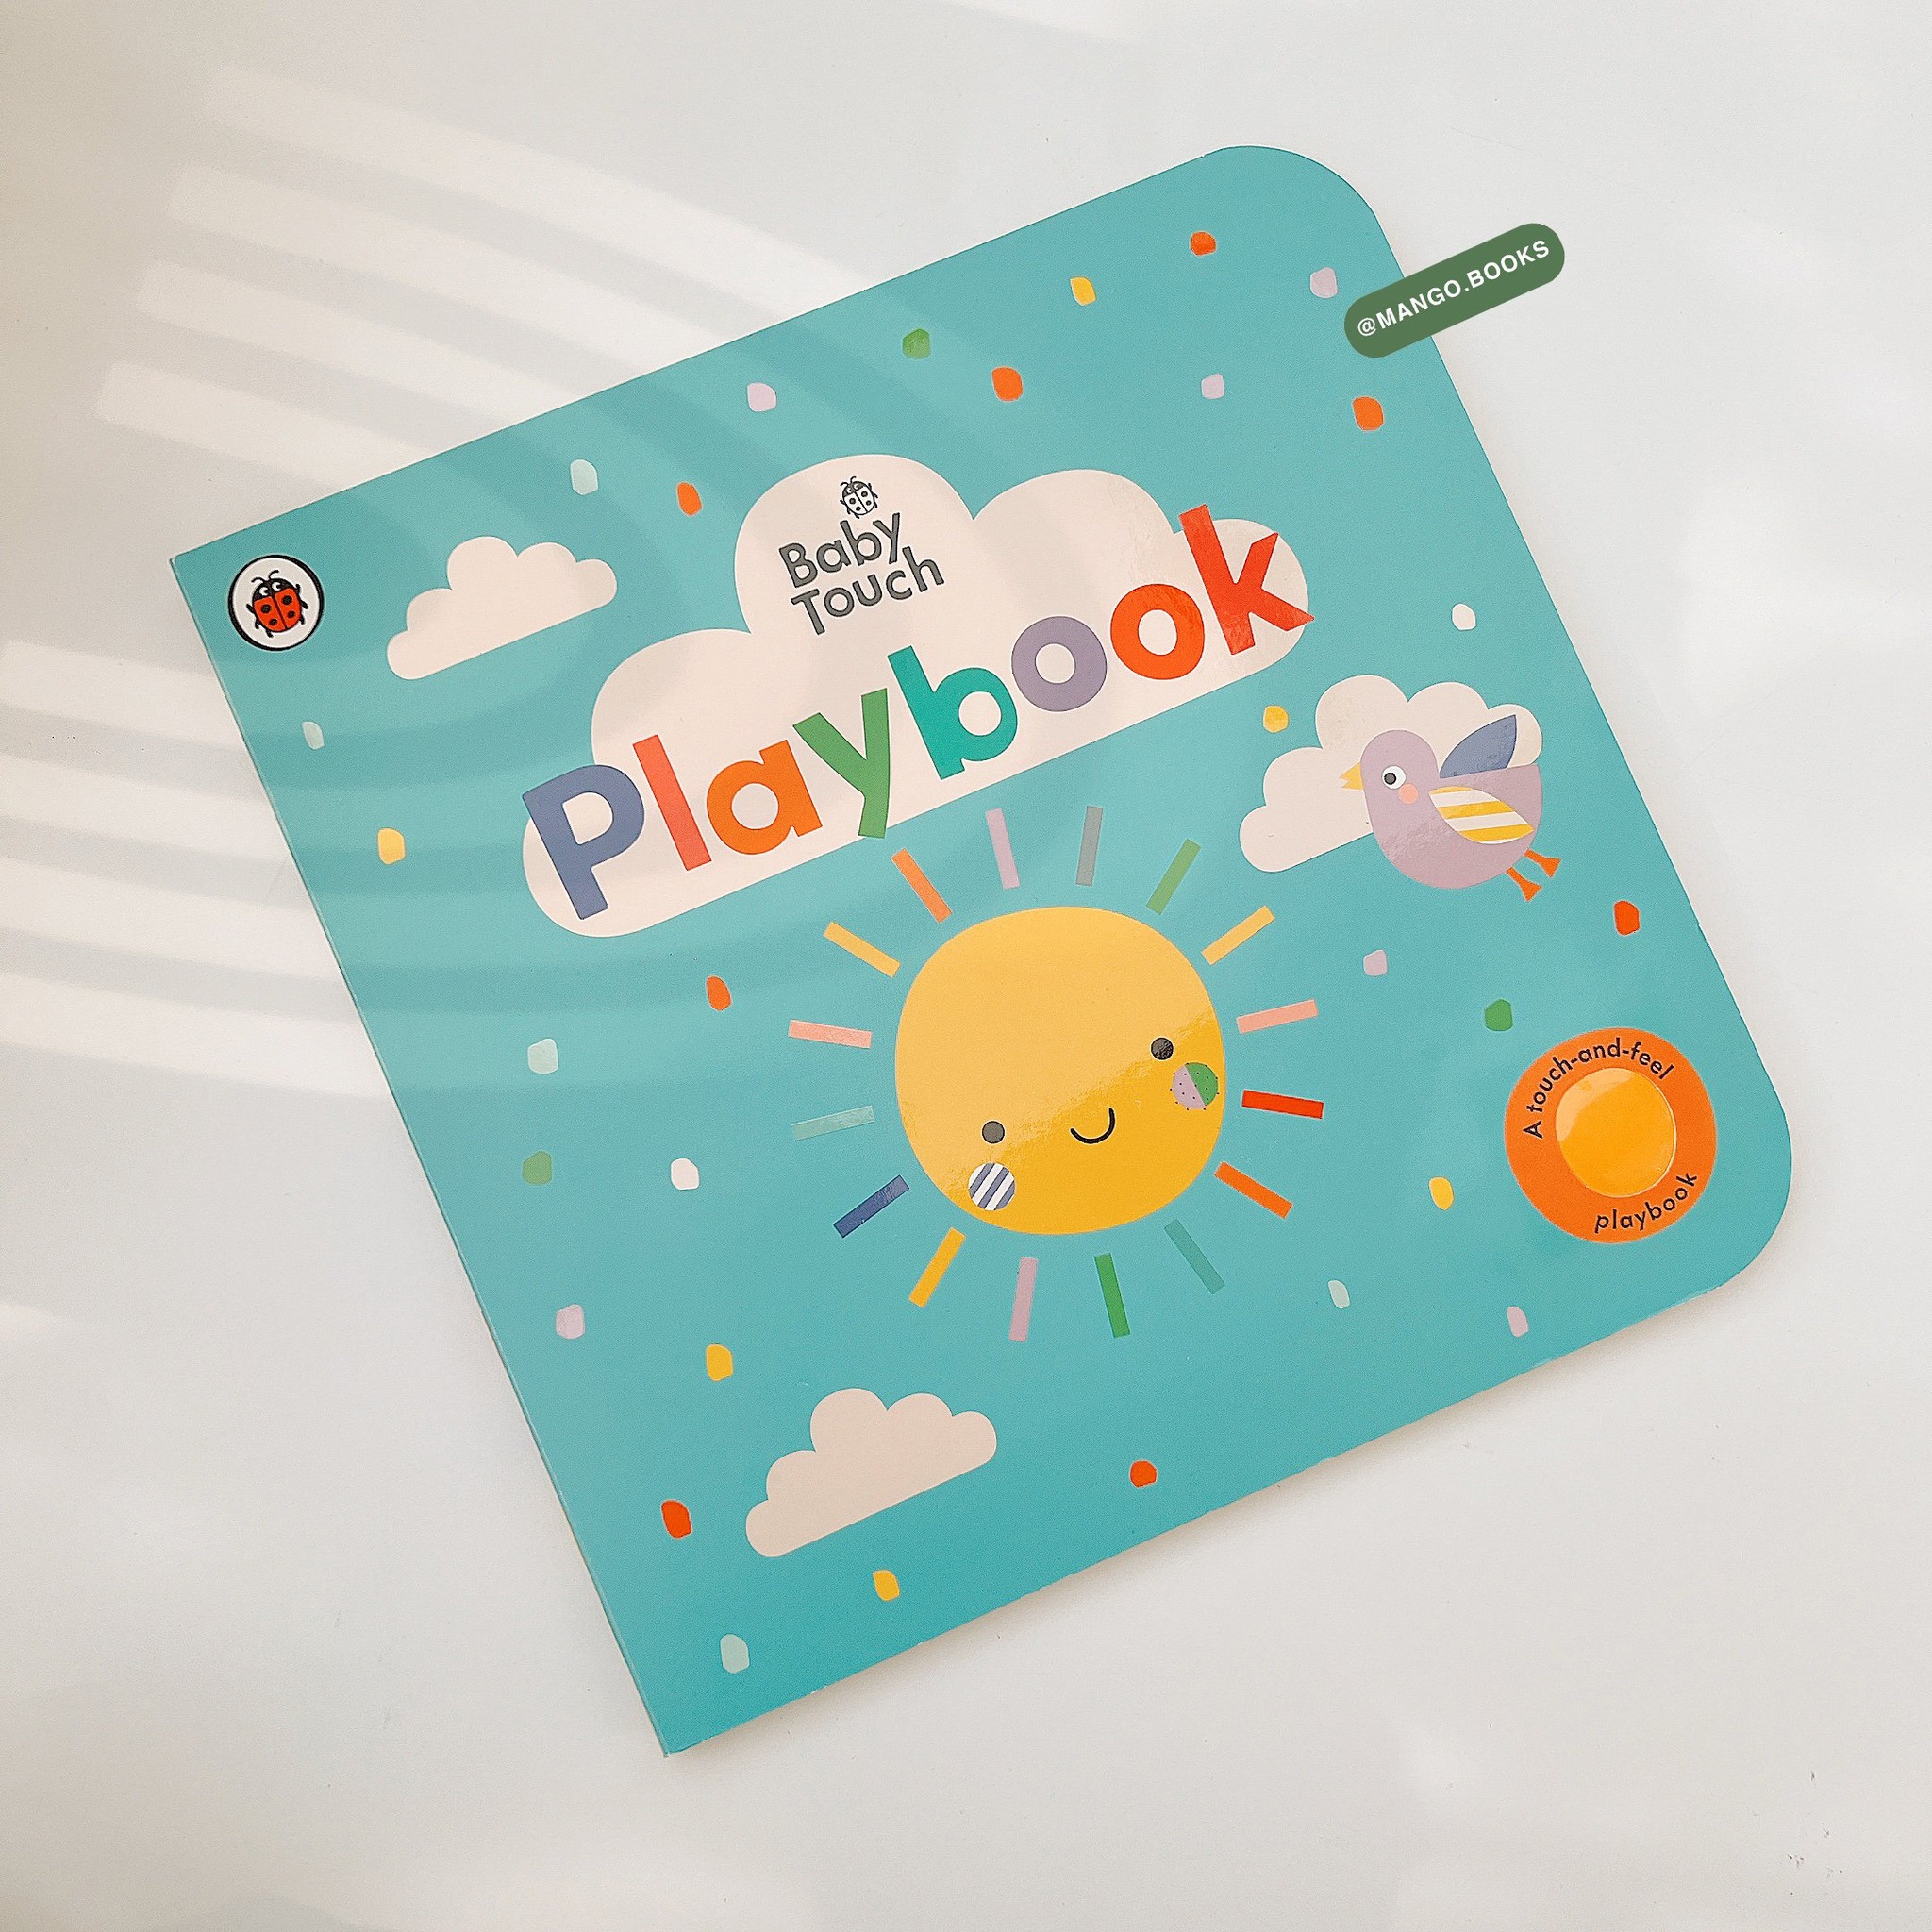 Baby Touch Tab: Playbook